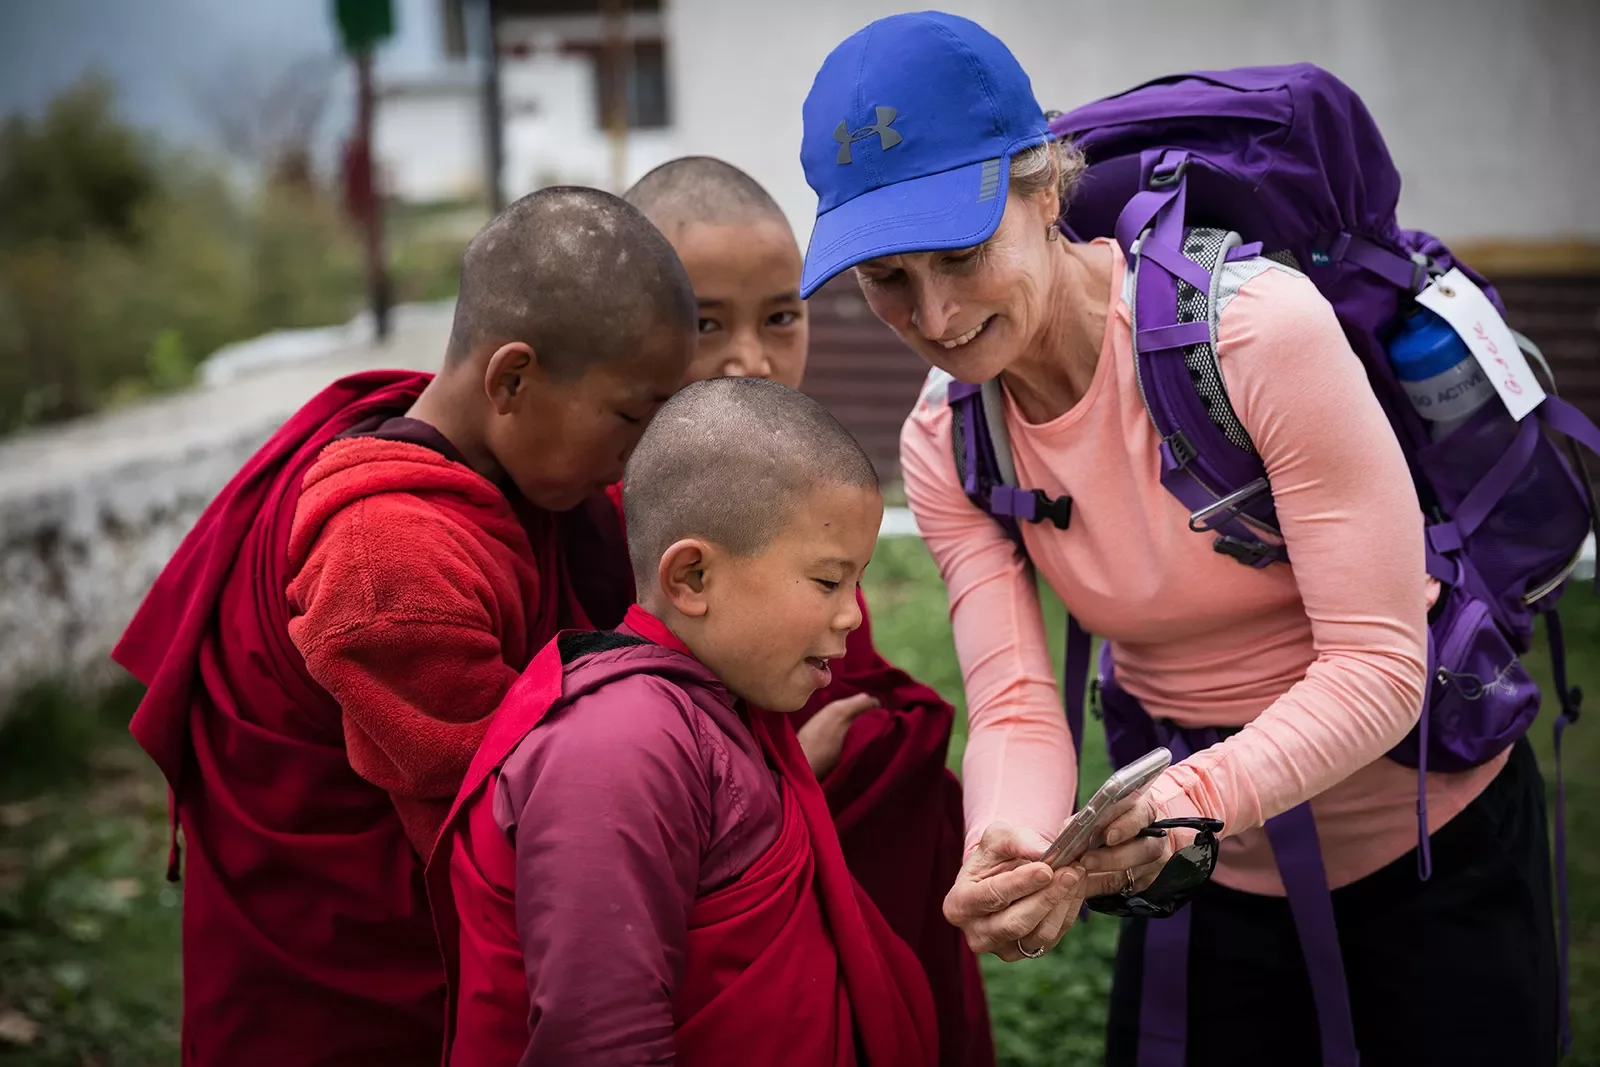 Woman showing her phone to young monks in Bhutan